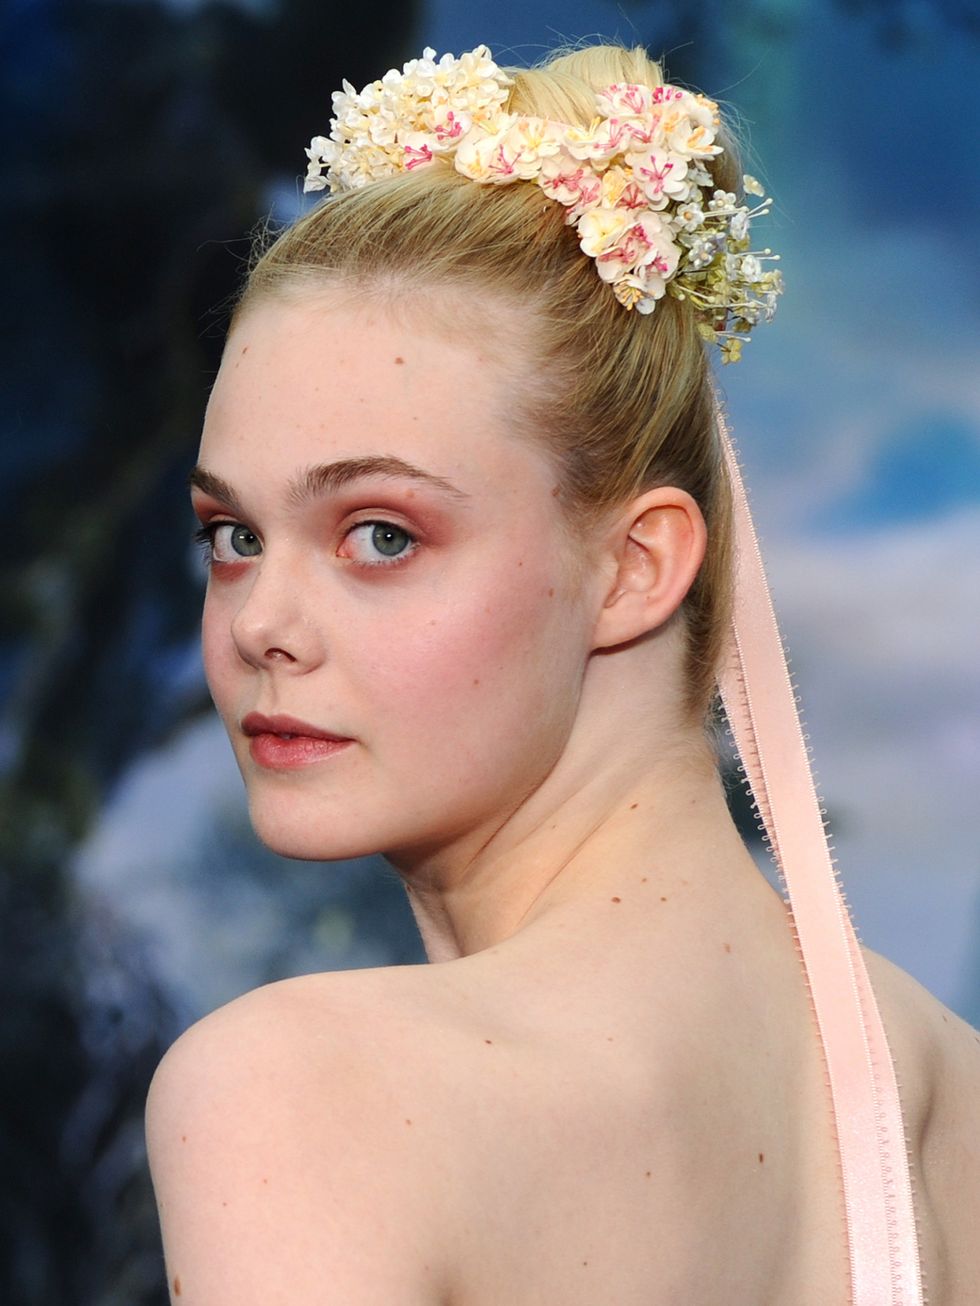 <p>It's only fitting Elle Fanning wore this look to promote Maleficent; the floral crown looping around her bun is a true fairytale look. And while we don't expect you to adorn yourself in ribbons like a Maypole, adding flowers to a tight topknot makes a great festival 'do.</p>
<p><a href="http://www.cosmopolitan.co.uk/beauty-hair/beauty-tips/wedding-hair-inspiration-how-to-choose-hair-accessory?click=main_sr" target="_blank">HOW TO CHOOSE A WEDDING HAIR ACCESSORY</a></p>
<p><a href="http://www.cosmopolitan.co.uk/beauty-hair/news/styles/hair-trends-spring-summer-2014?click=main_sr" target="_blank">THE HUGE HAIR TRENDS FOR 2014</a></p>
<p><a href="http://www.cosmopolitan.co.uk/beauty-hair/news/beauty-news/how-to-do-festival-plait-hairstyle?click=main_sr" target="_blank">HAIR HOW-TO: FESTIVAL PLAITS</a></p>